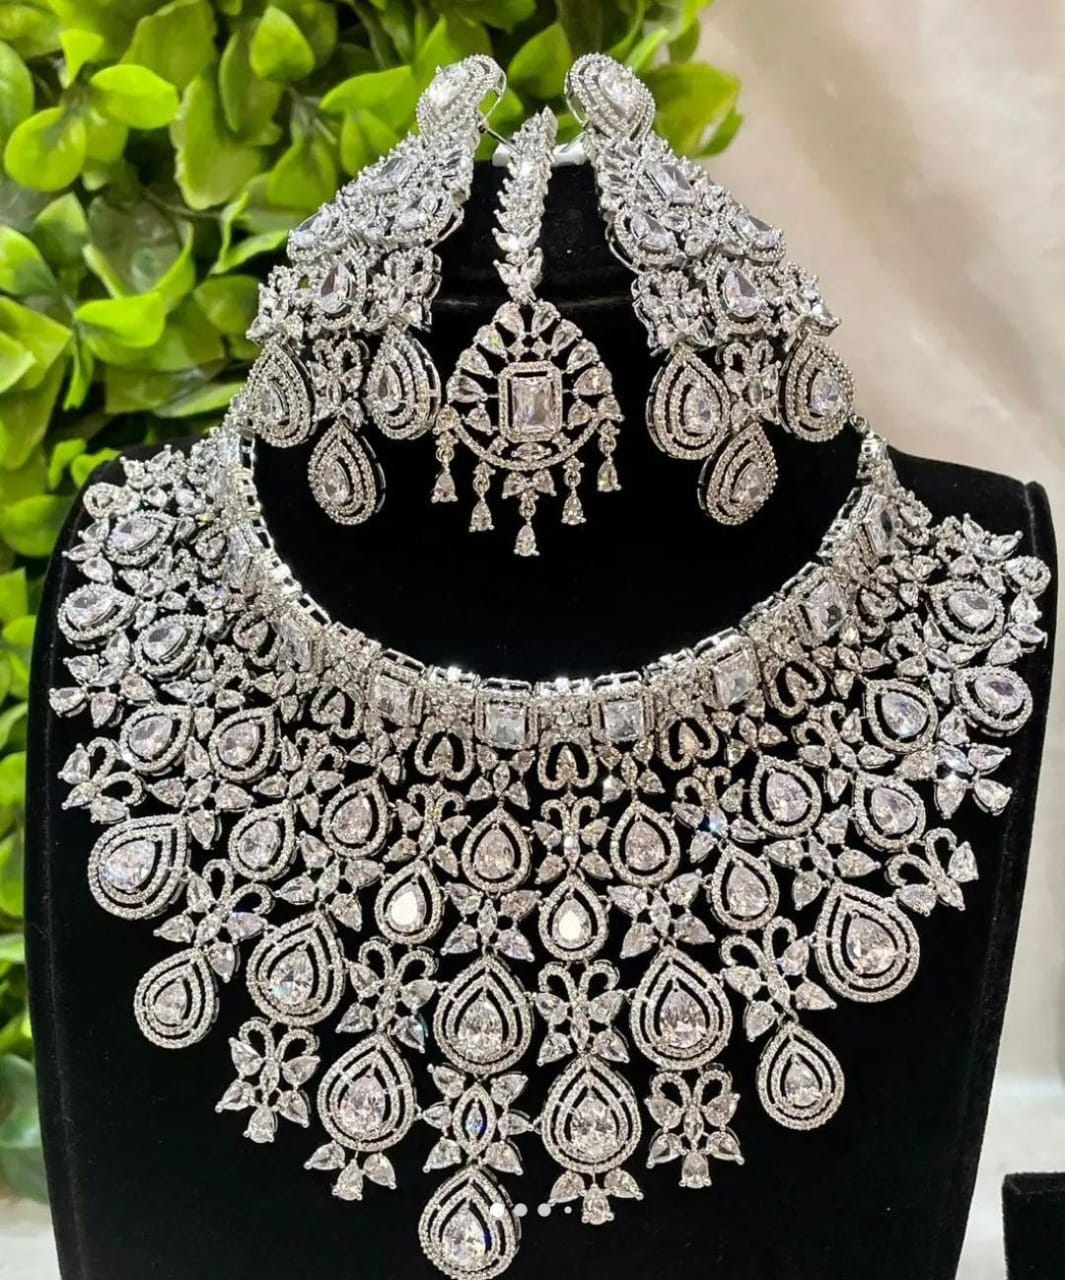 Unique CZ Stone Bridal Choker Necklace with Earrings and Tikka -Silver and RoseGold polish